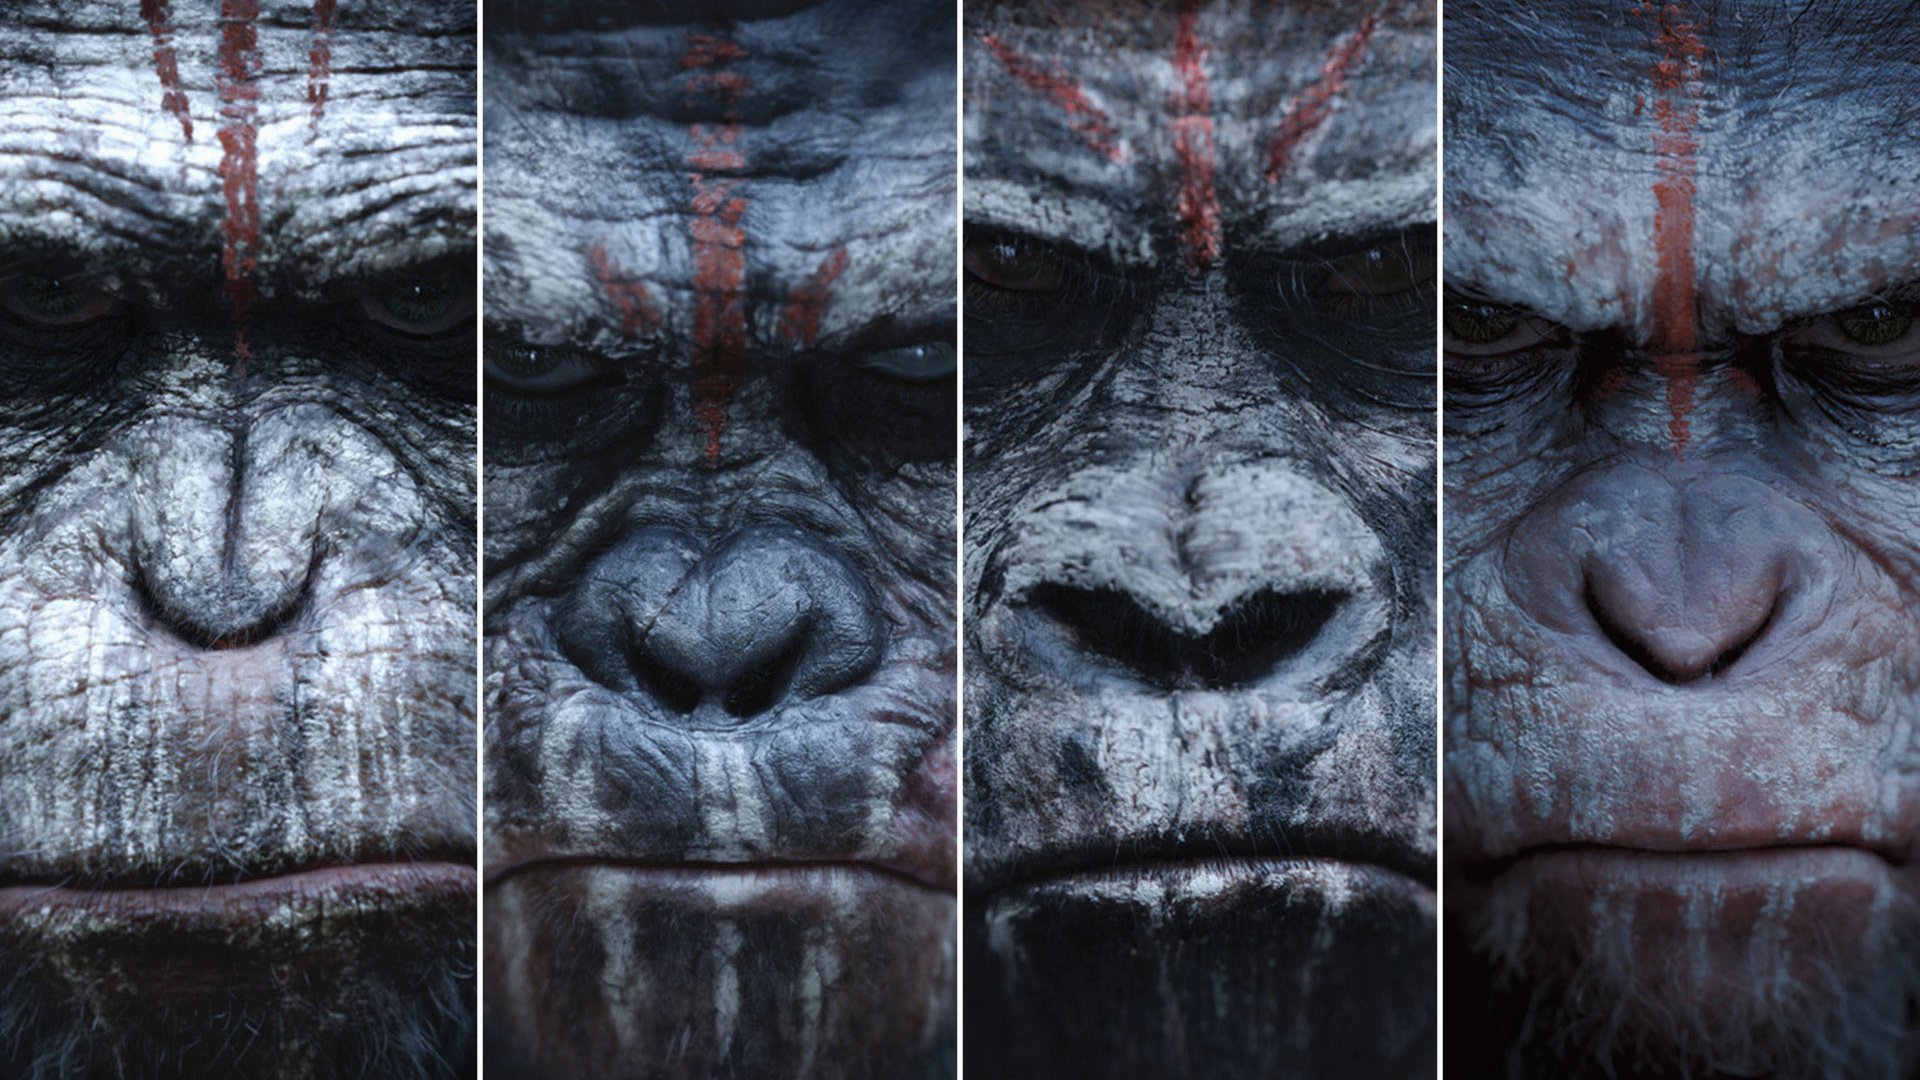 Movie Dawn of the Planet of the Apes HD Wallpaper | Background Image